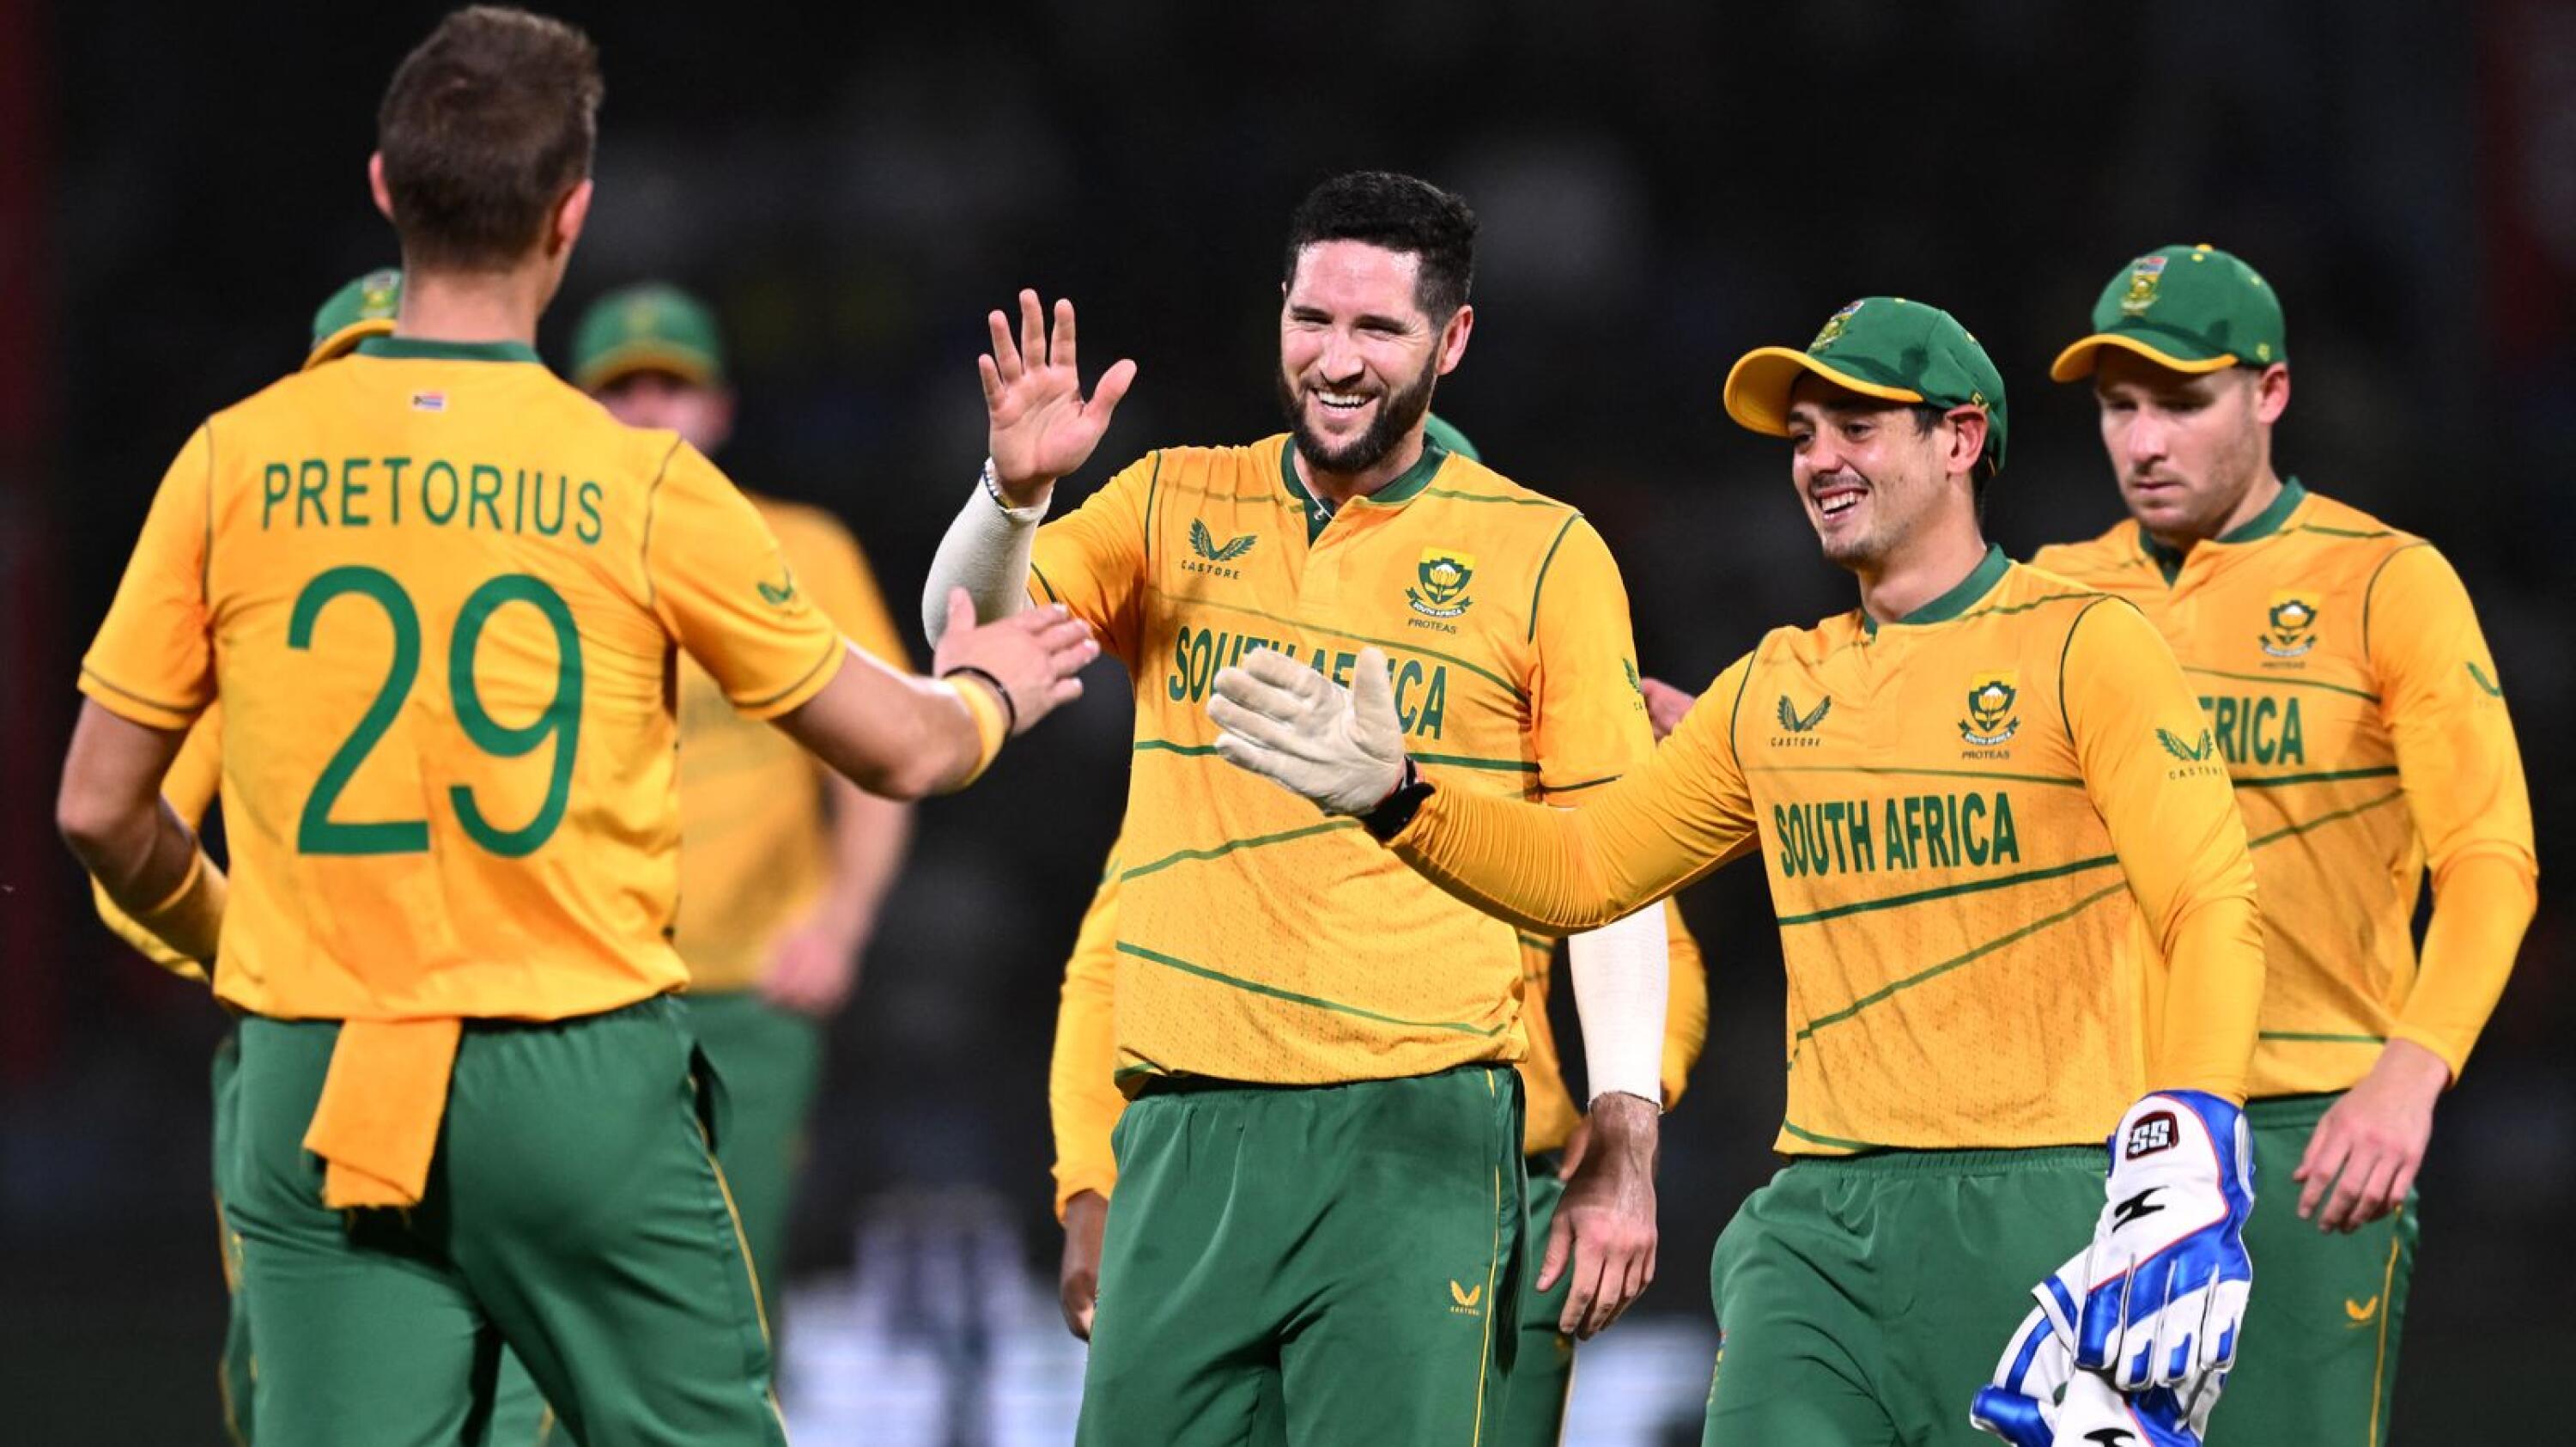 South Africa's Wayne Parnell (C) celebrates with teammates after taking the wicket of India's Ruturaj Gaikwad (not pictured) during the first Twenty20 international cricket match at the Arun Jaitley Stadium in New Delhi on Thursday